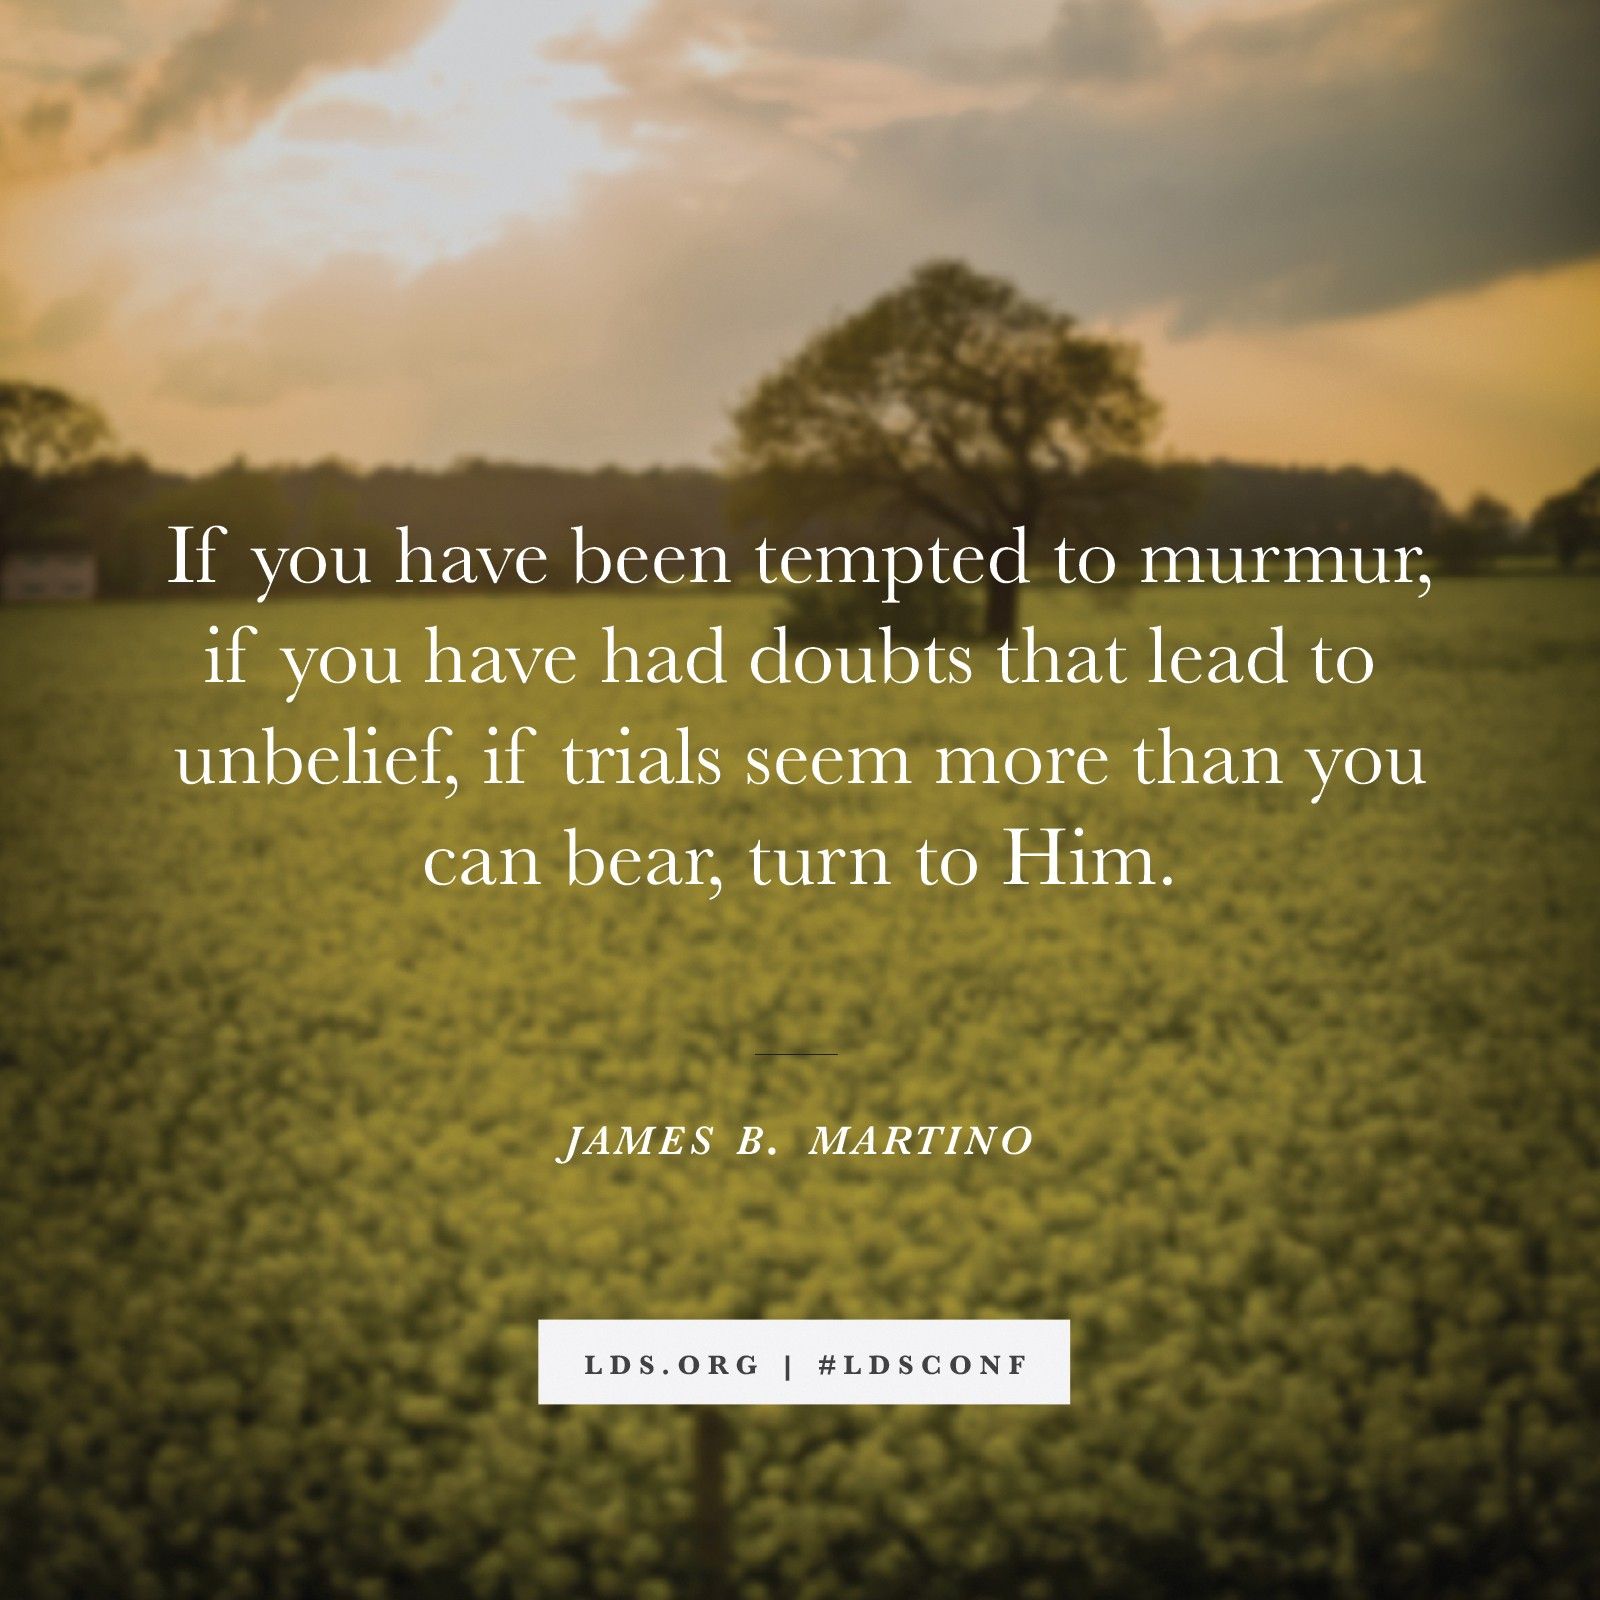 “If you have been tempted to murmur, if you have had doubts that lead to unbelief, if trials seem more than you can bear, turn to Him.” —Elder James B. Martino, “Turn to Him and Answers Will Come”